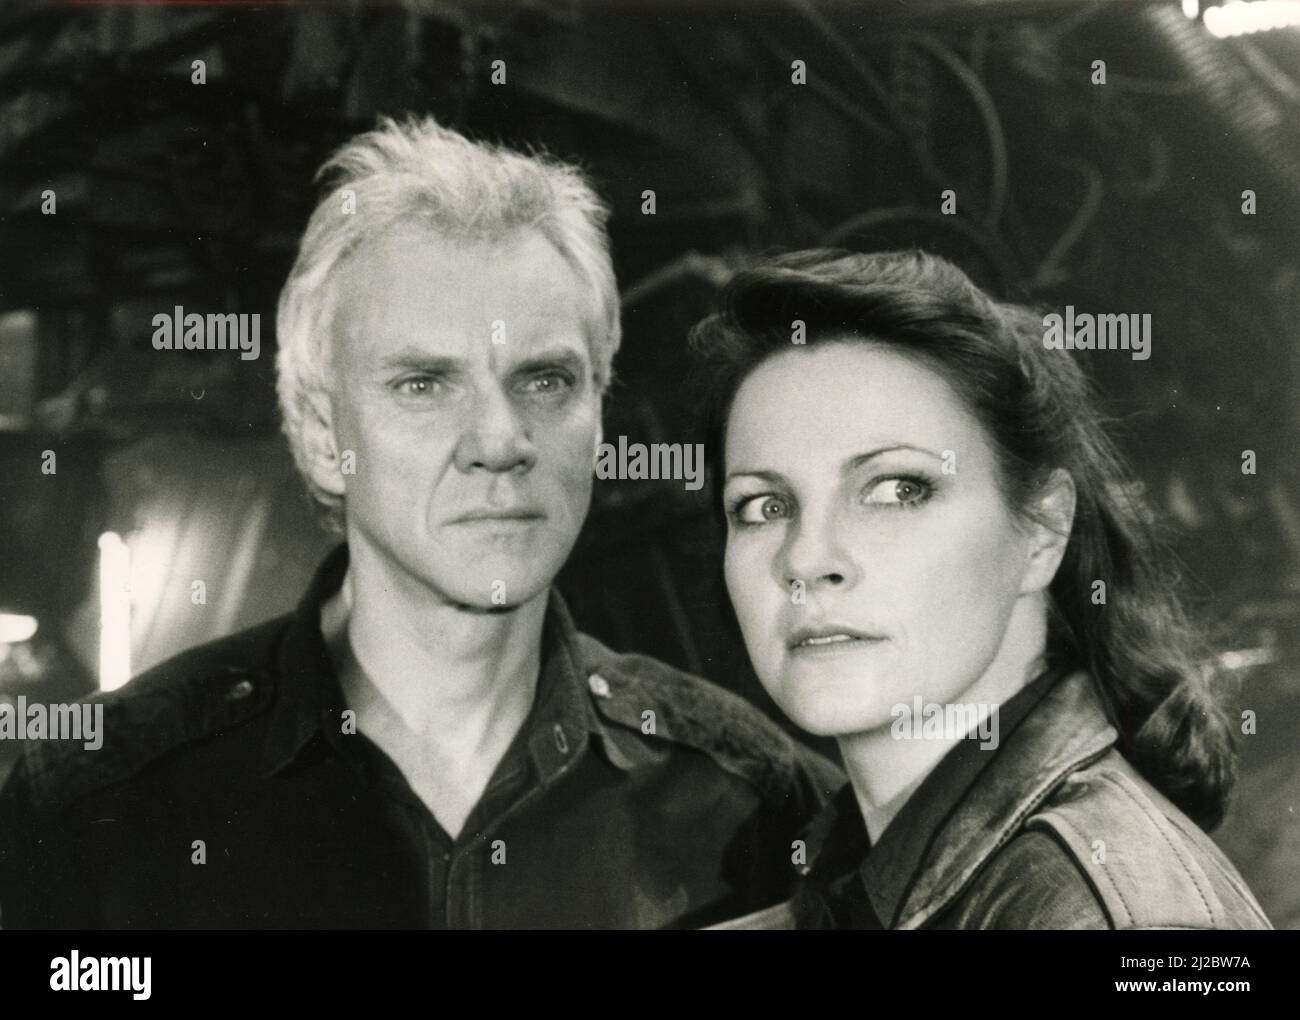 English Actor Malcolm McDowell And Actress Lisa Eichhorn In The Movie